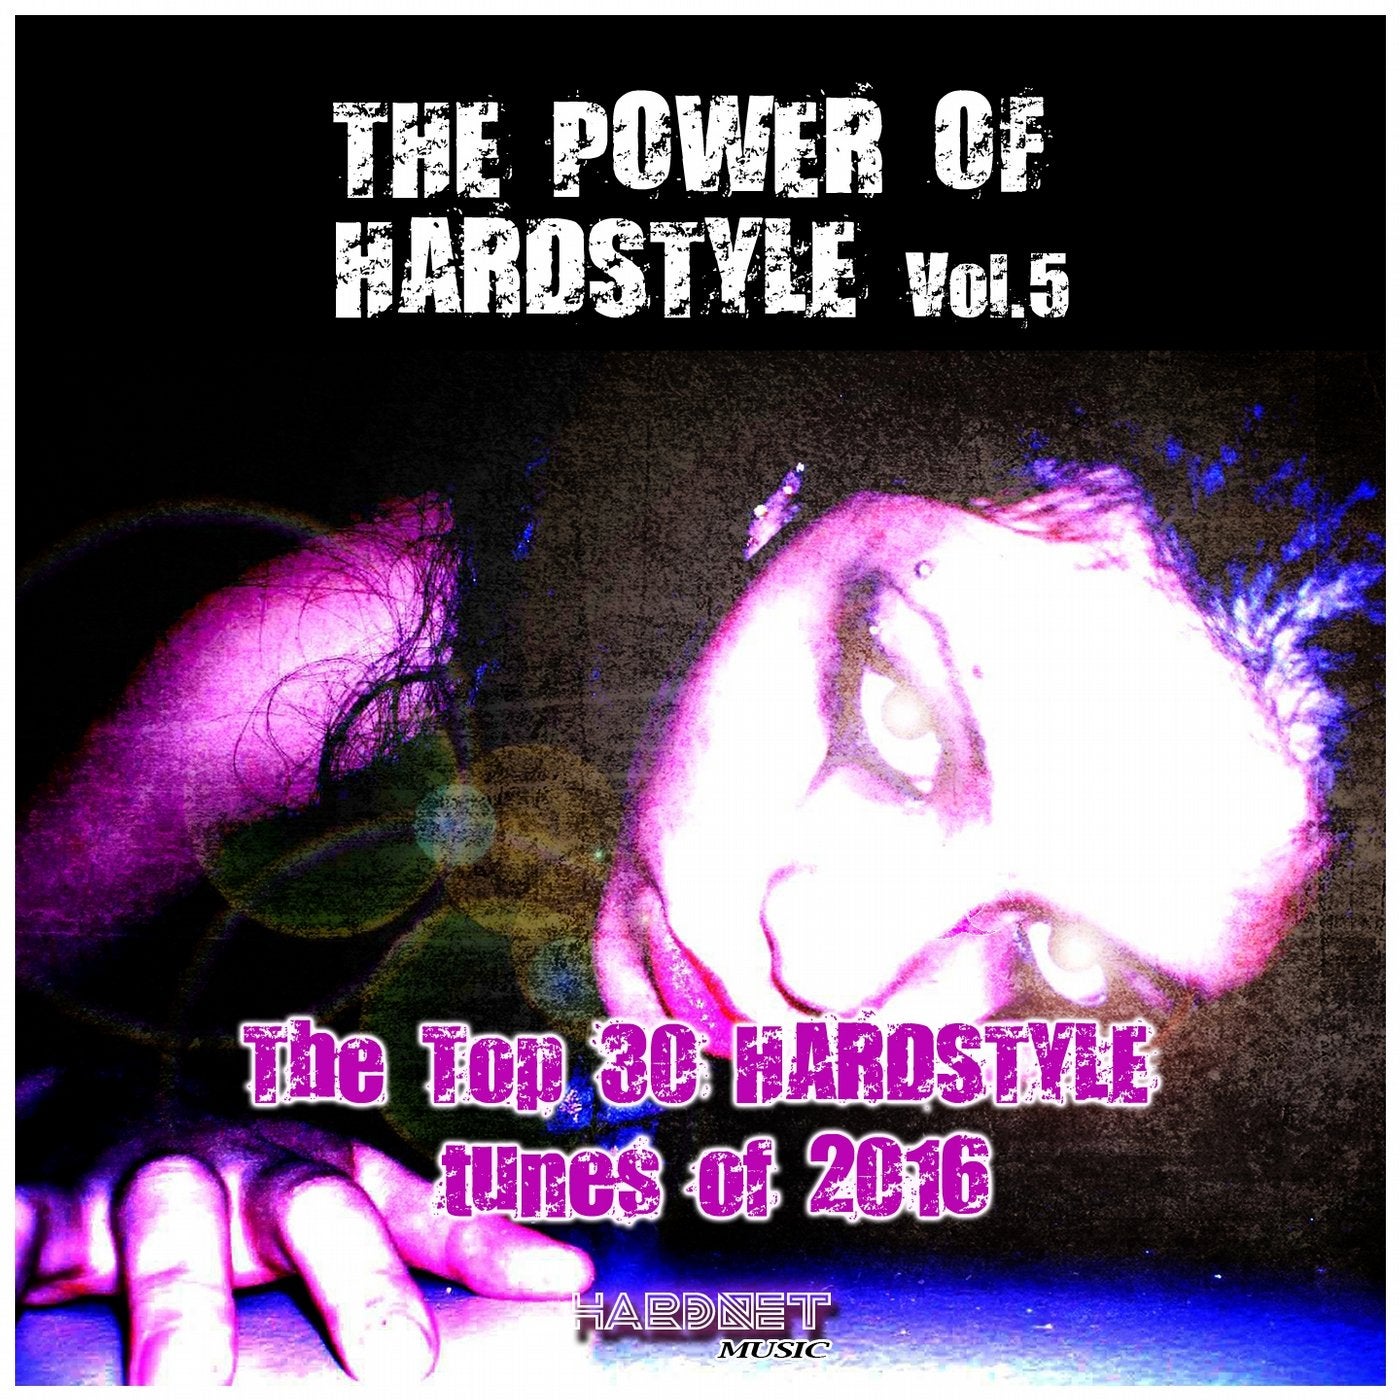 The Power Of Hardstyle, Vol. 5 (The Top 30 Hardstyle Tunes of 2016)